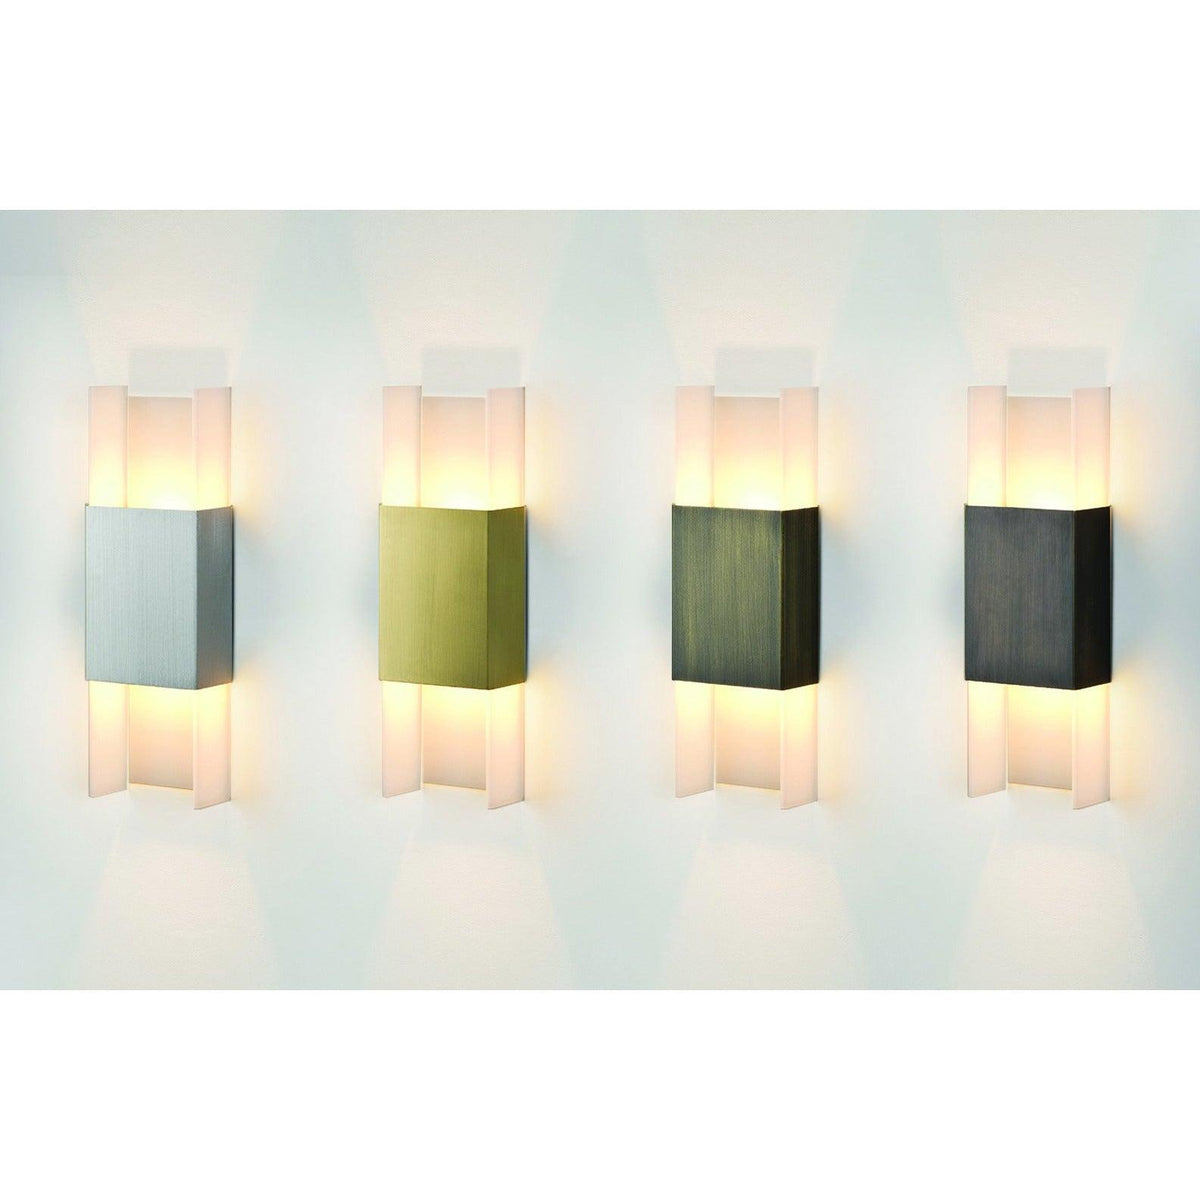 Cerno - Ansa LED Wall Sconce - 03-137-A-27P1 | Montreal Lighting & Hardware